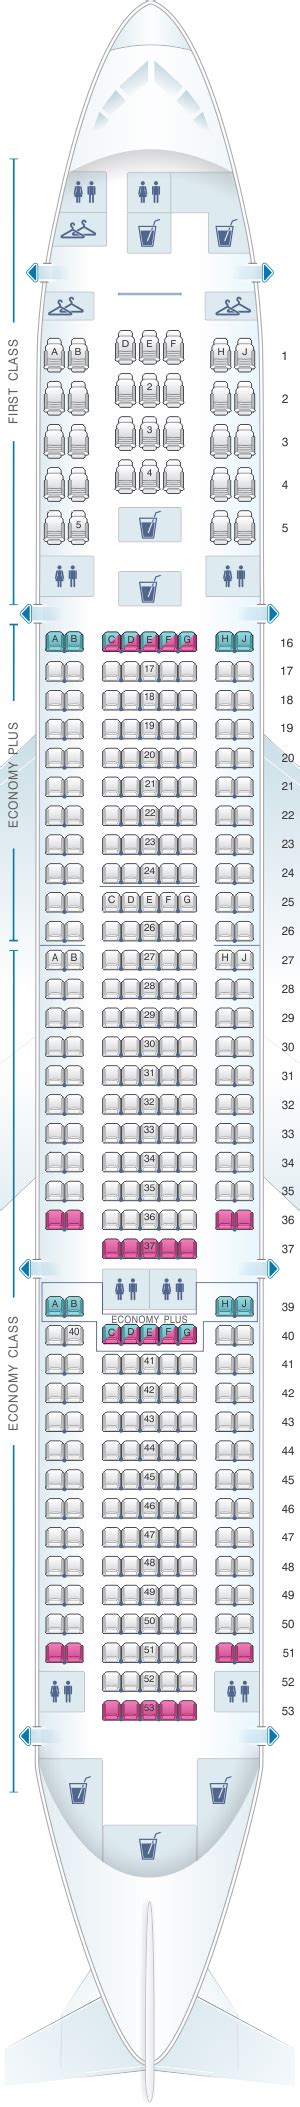 Boeing 777 united seat map. local_pizza. Seat 45D is a standard economy aisle seat with 31" of seat pitch, which is average across Boeing 777's worldwide. 45D is has a bulkhead behind it, which means there's nobody behind you to bump or kick your seat, but your seat recline may be slightly limited. 